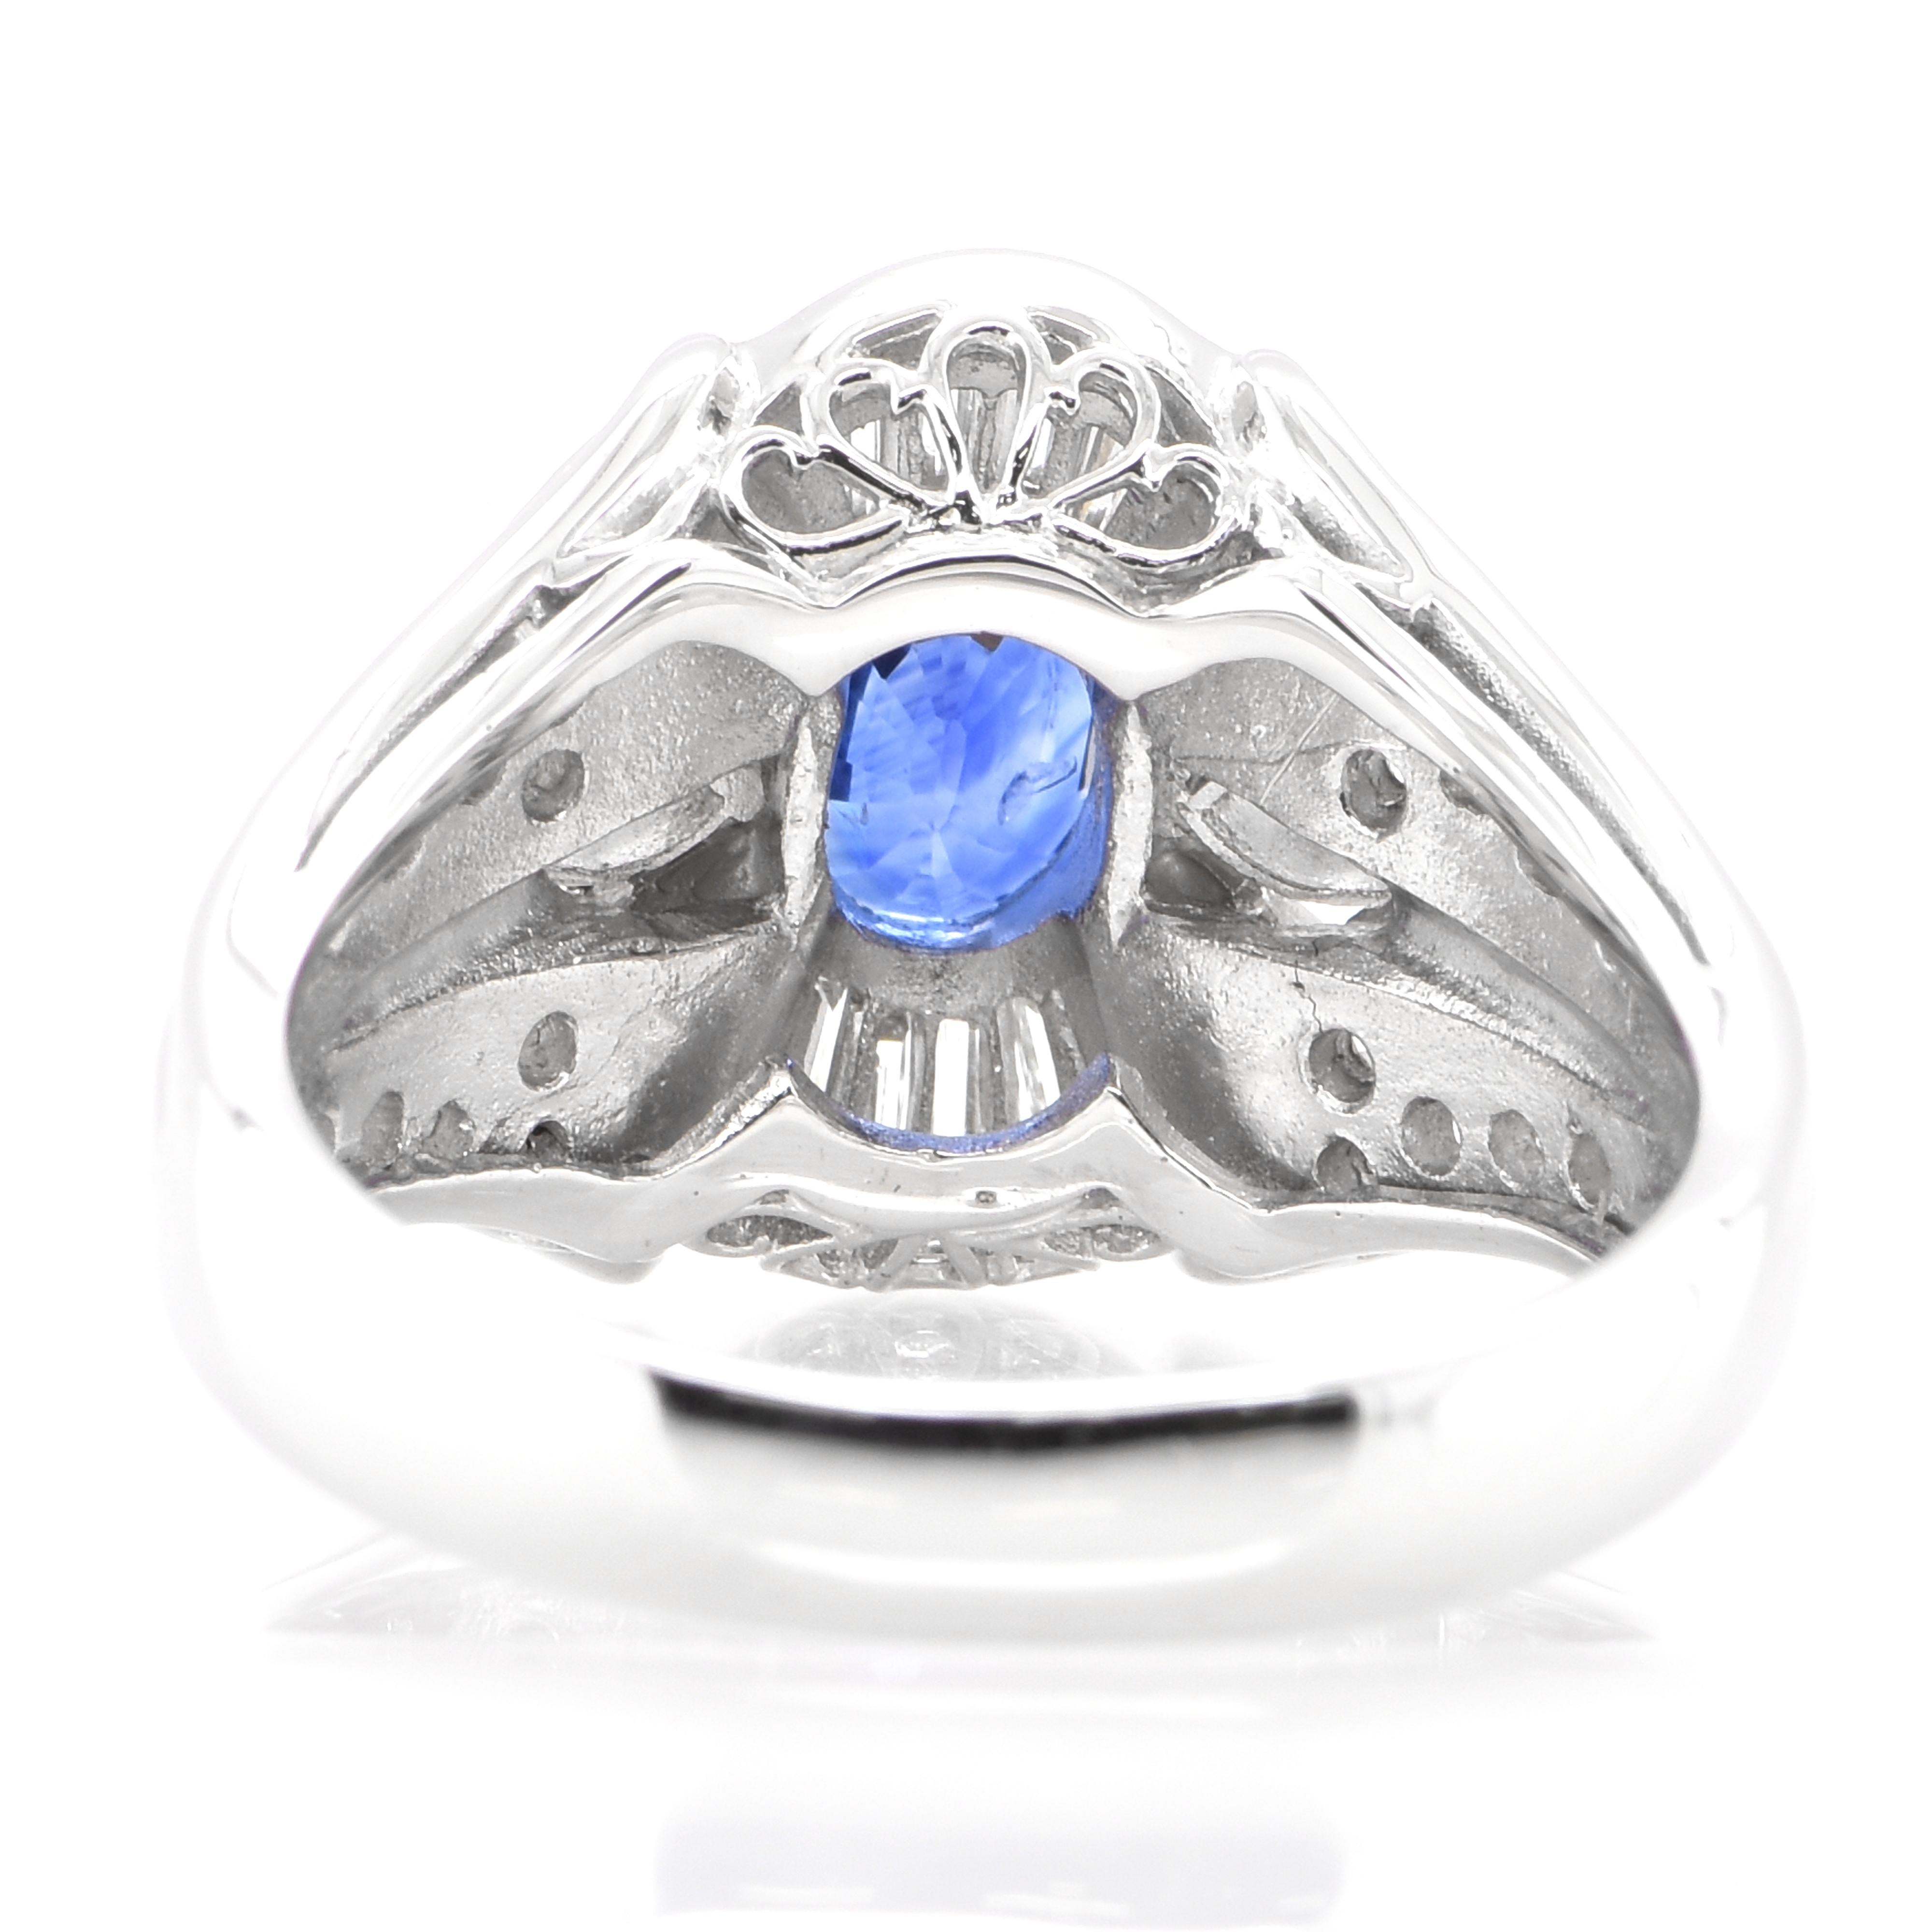 Women's Vintage 1.46 Carat Natural Blue Sapphire and Diamond Ring Made in Platinum For Sale